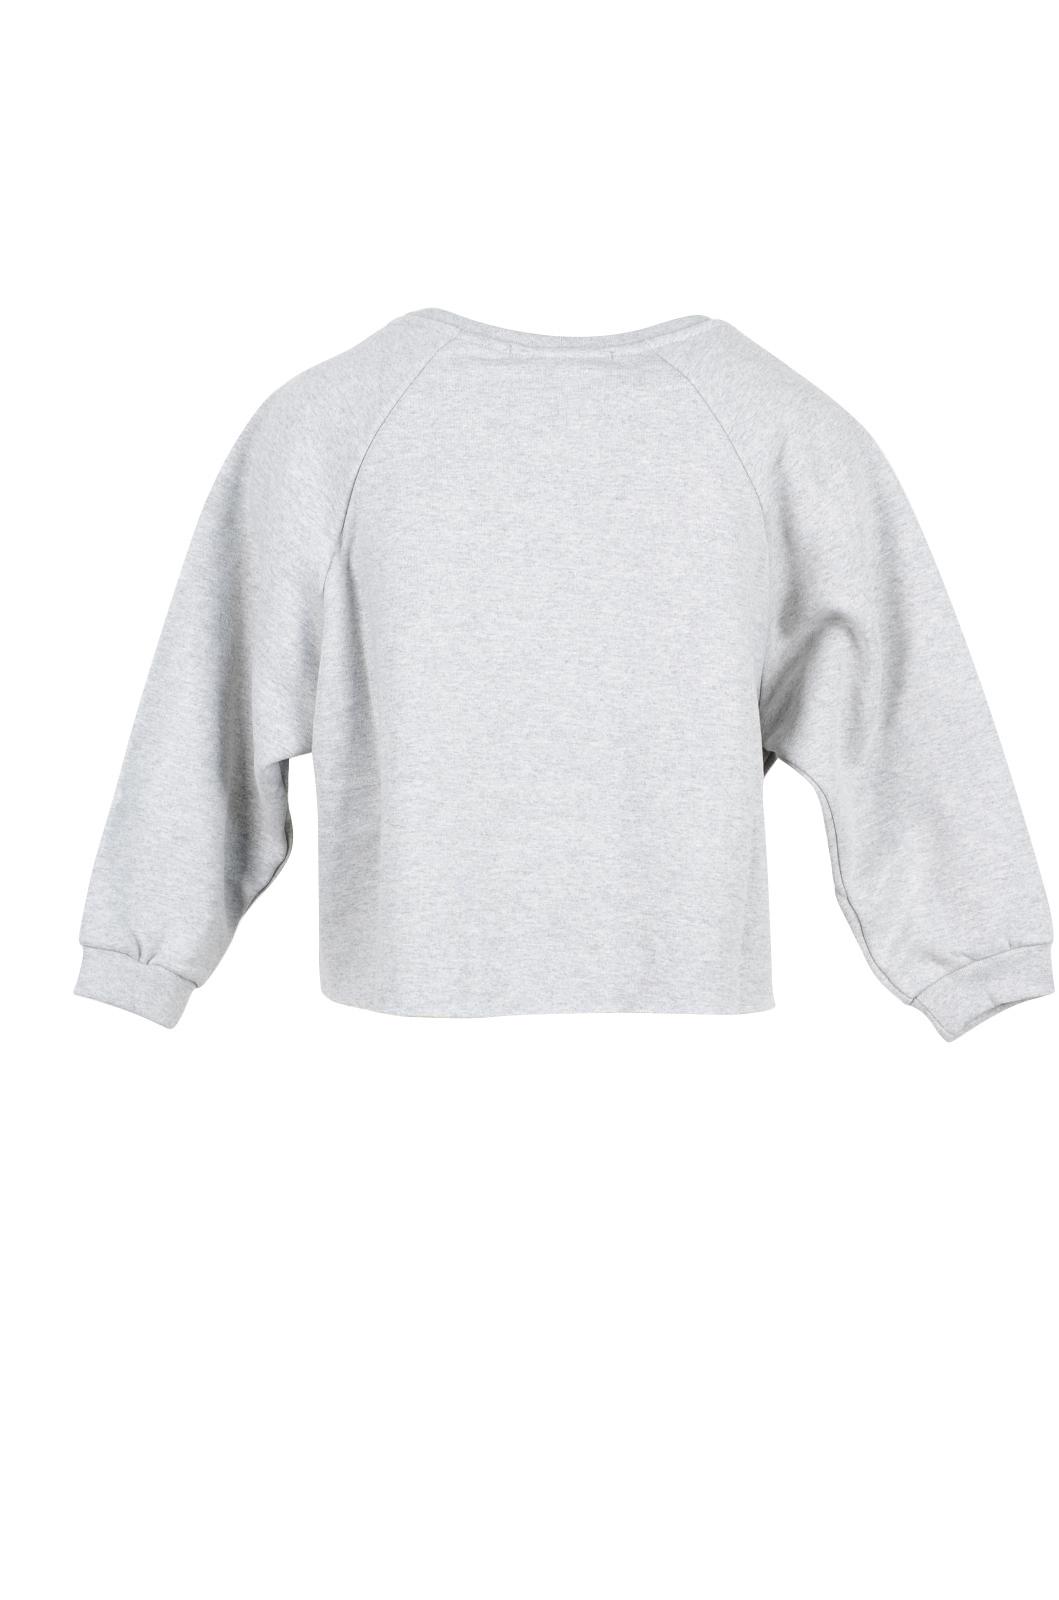 Gray Cotton Cropped Women's Sweater展示图